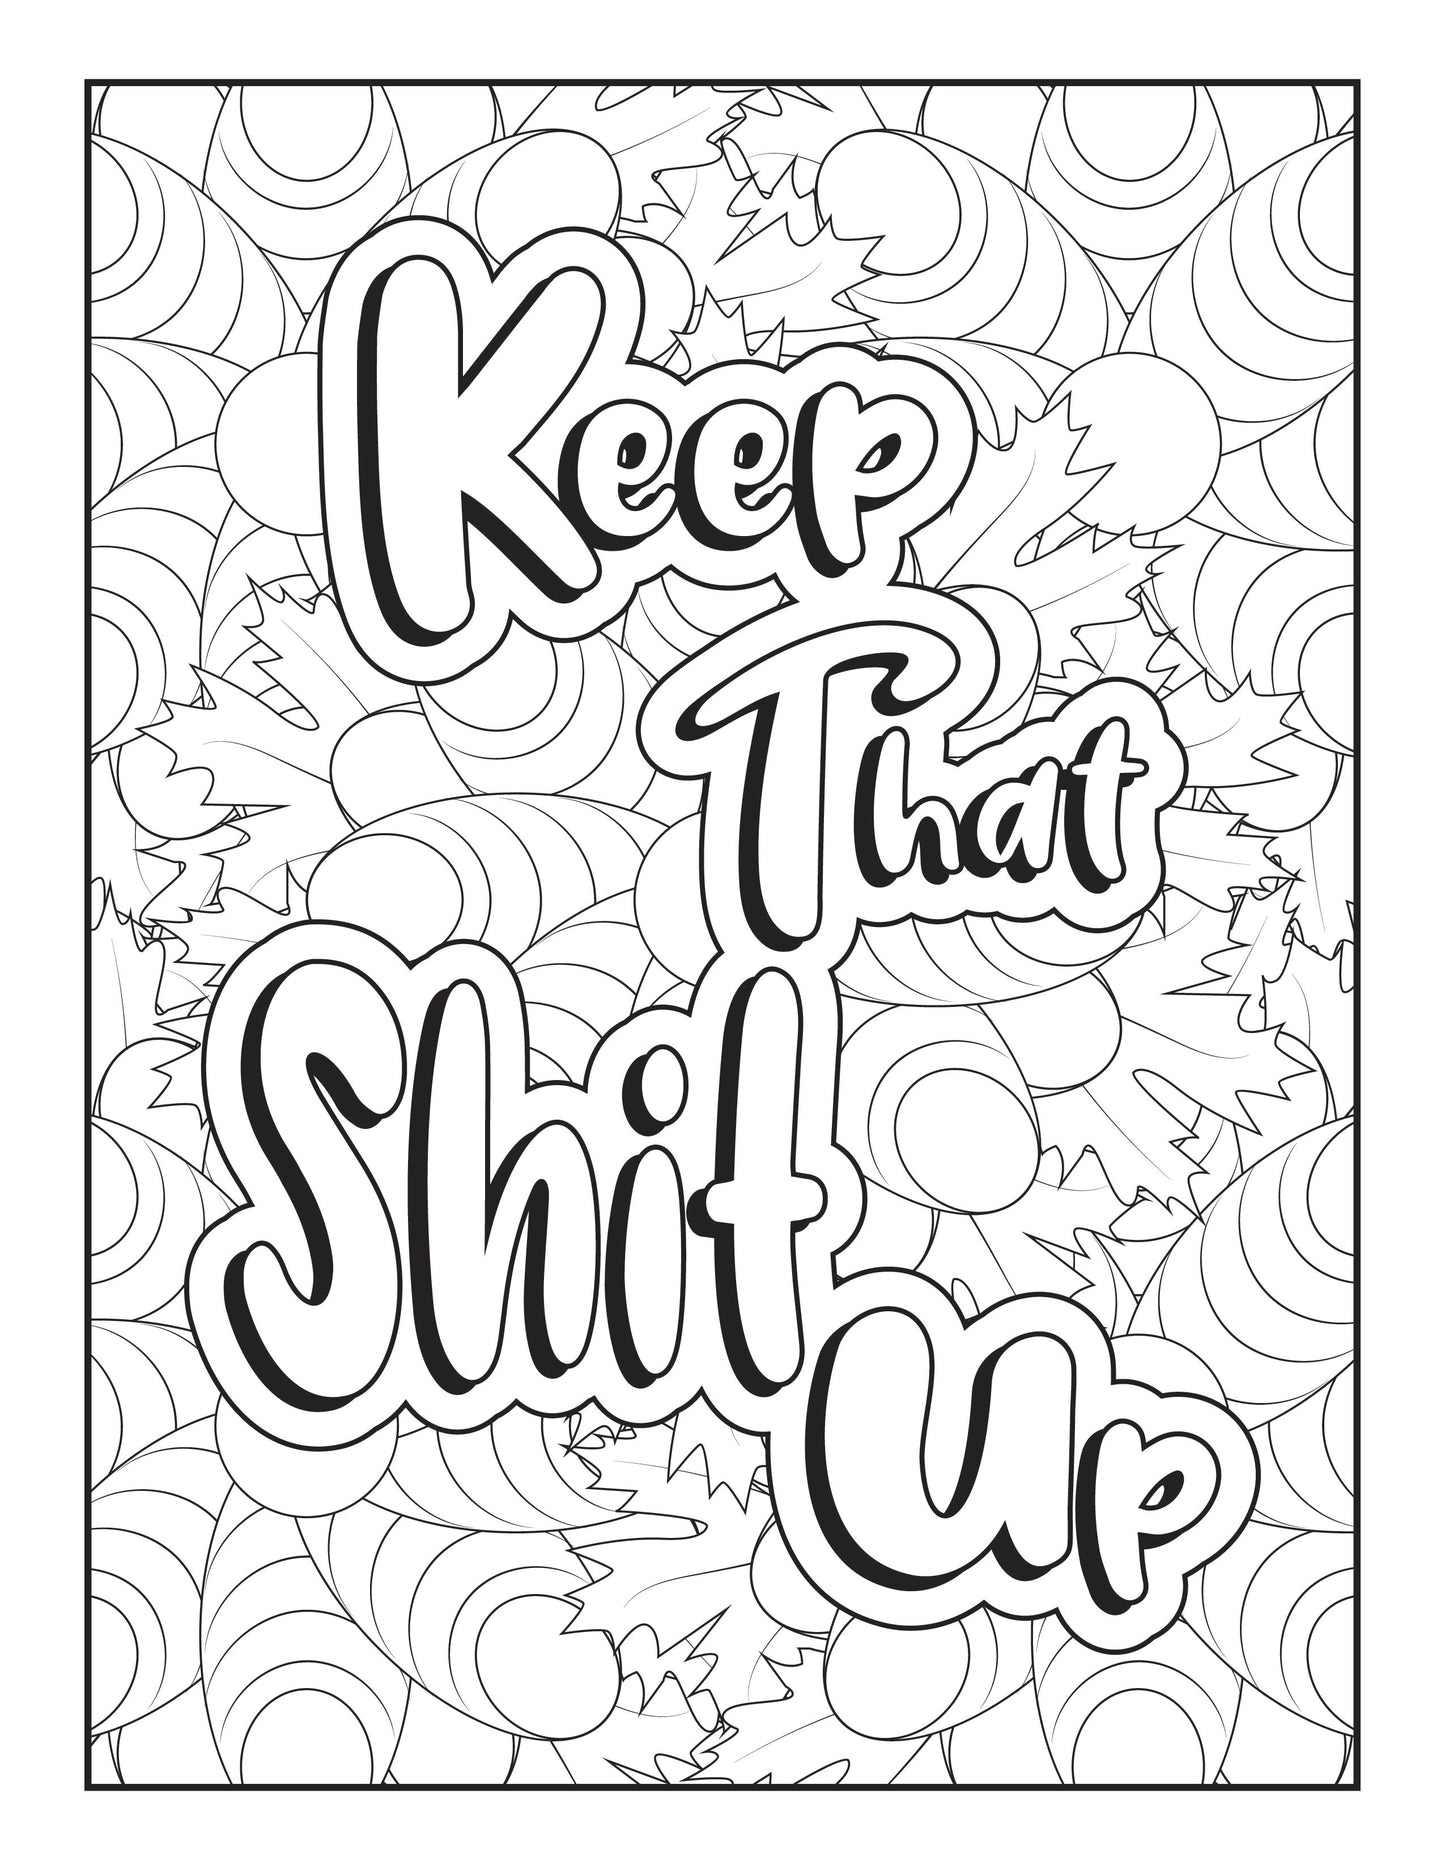 Stress Relief Sassy Affirmations Coloring Pages - Digital Download